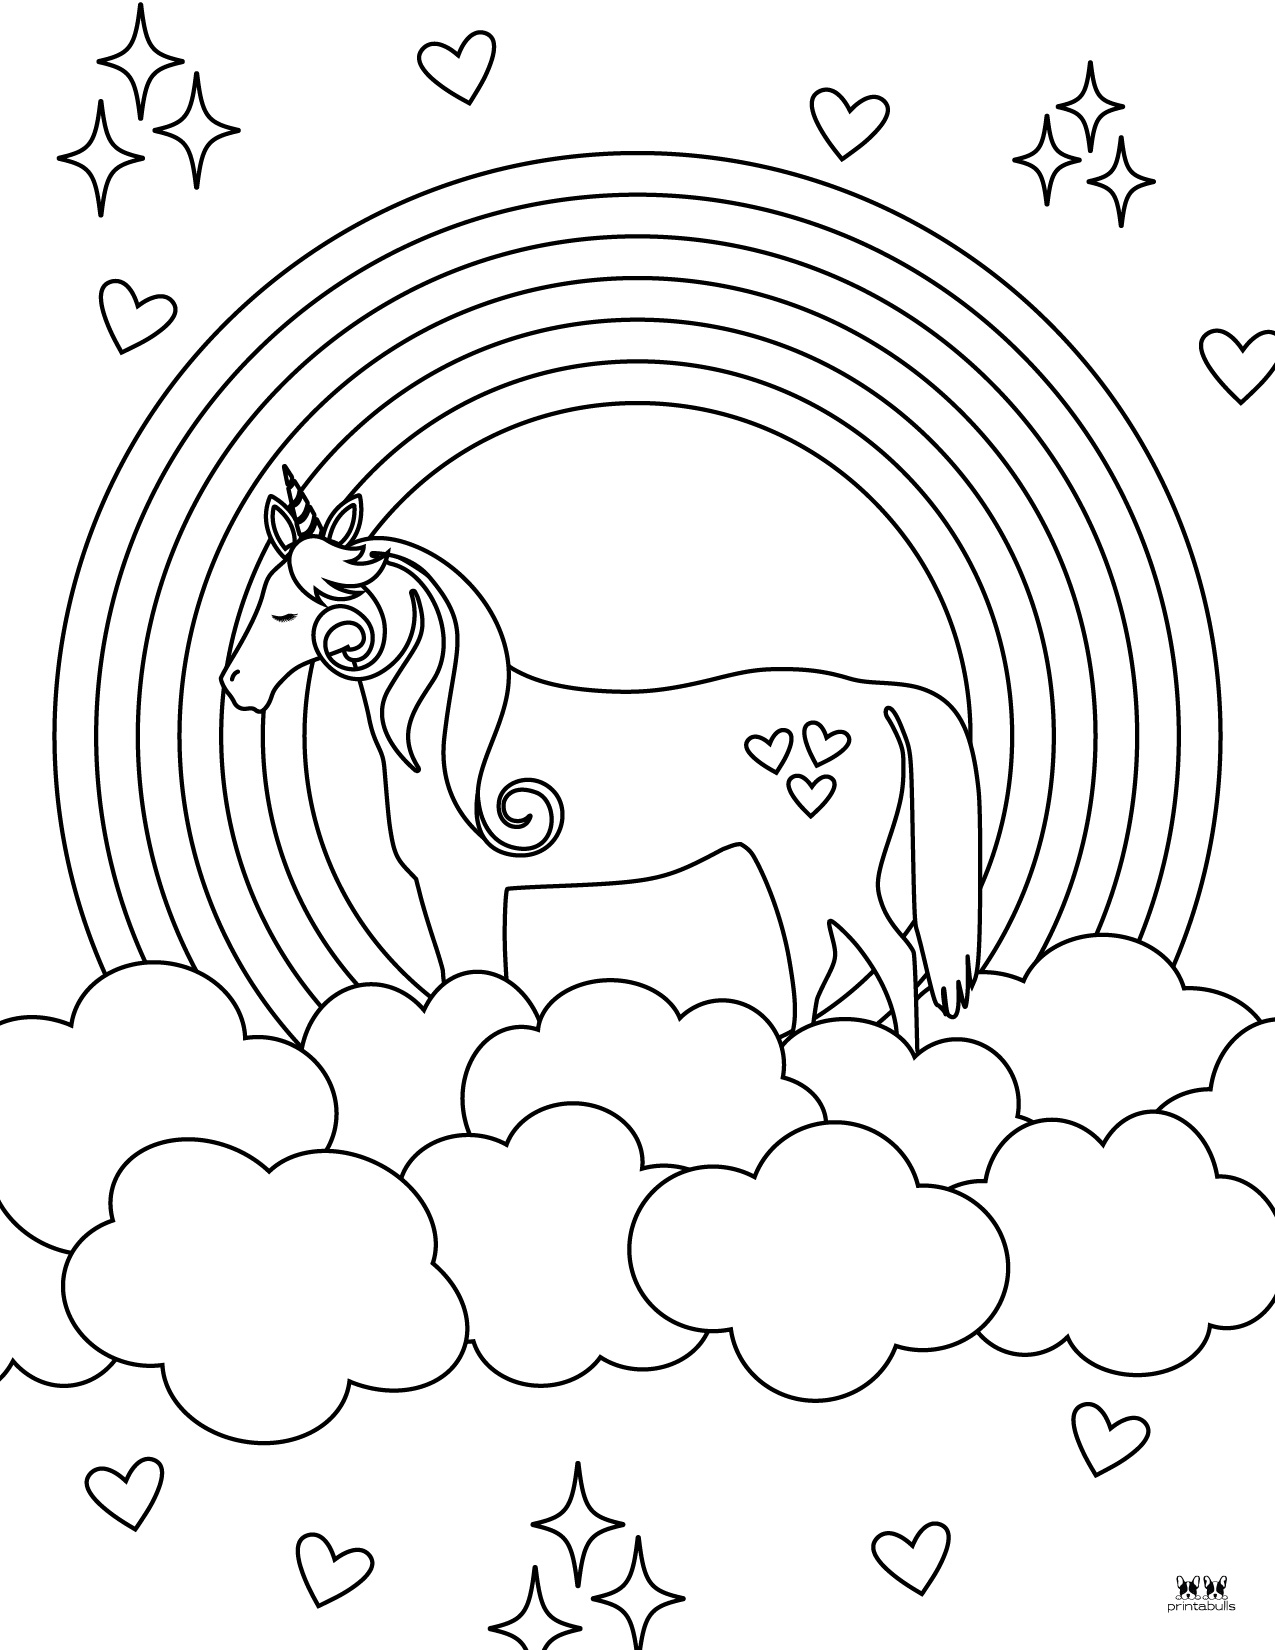 rainbow-high-coloring-pages-printable